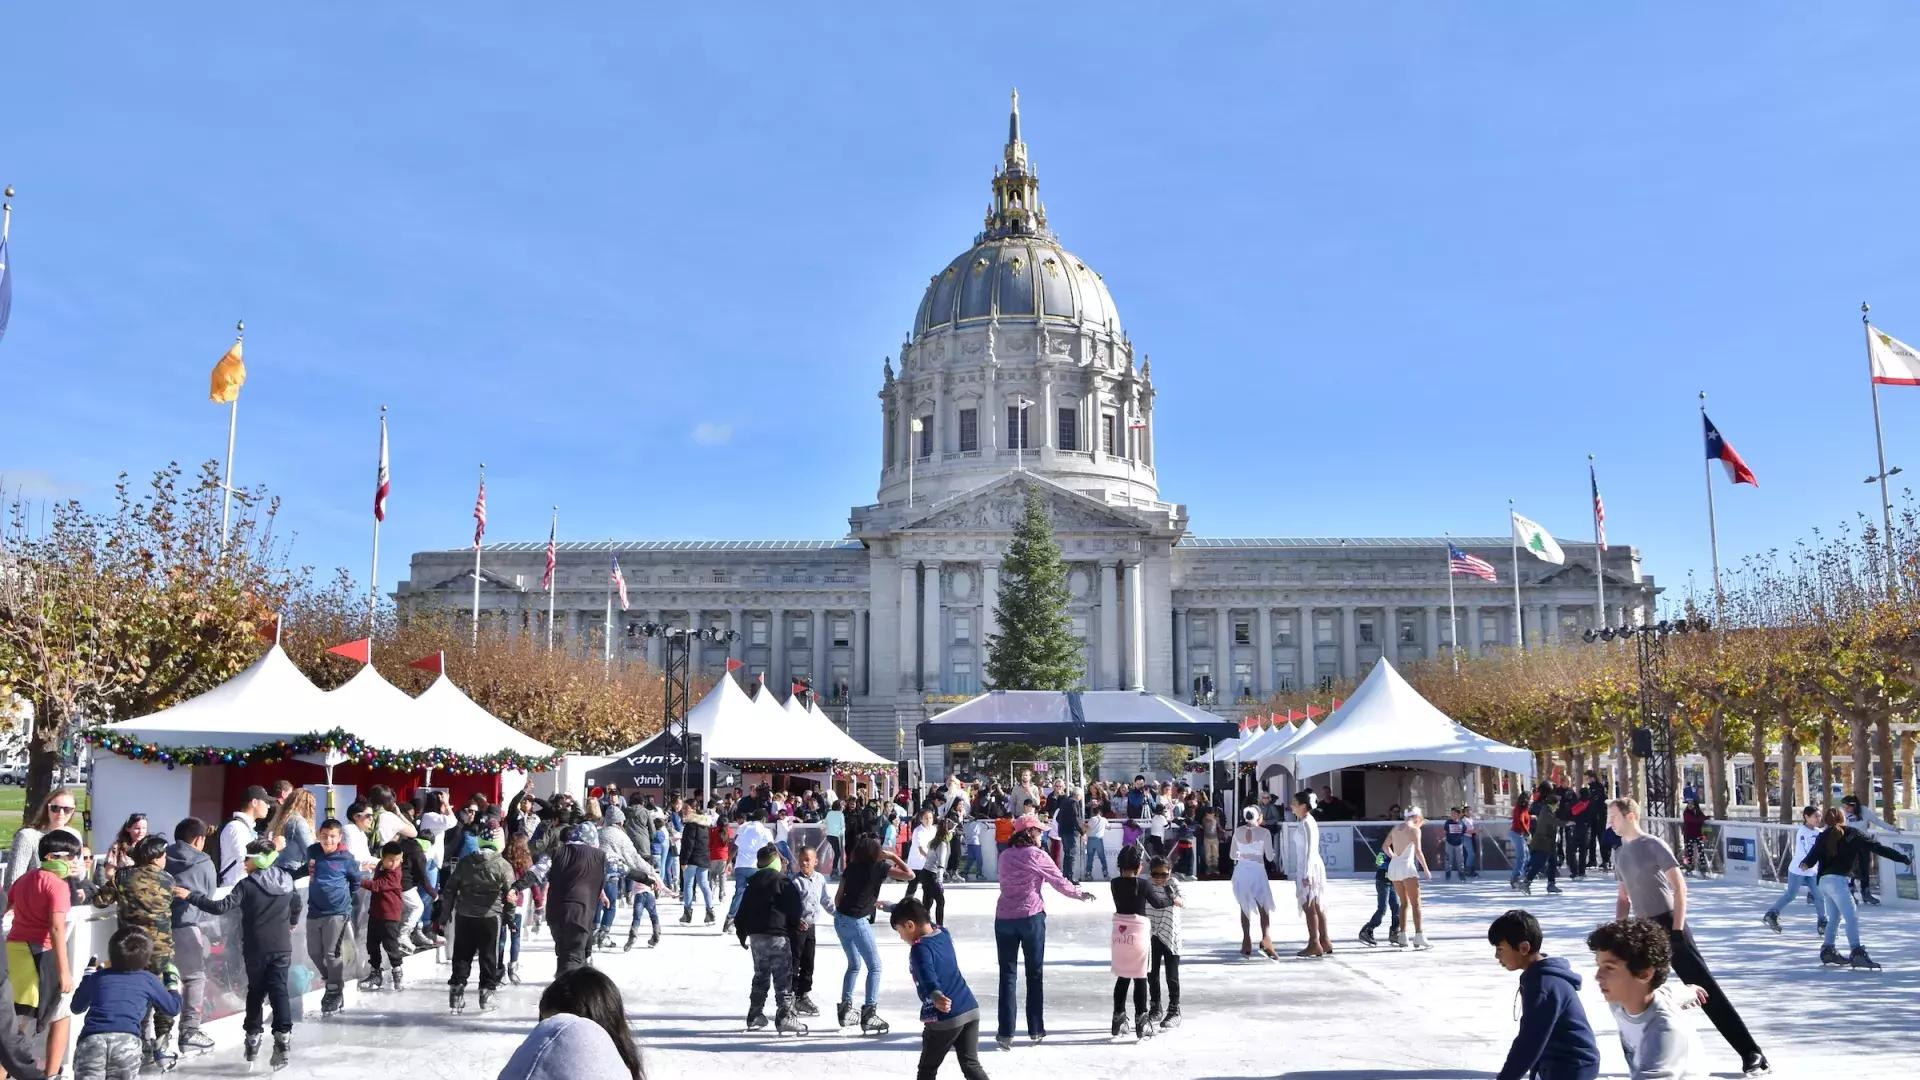 Skaters take to the ice at one of San Francisco's seasonal rinks.